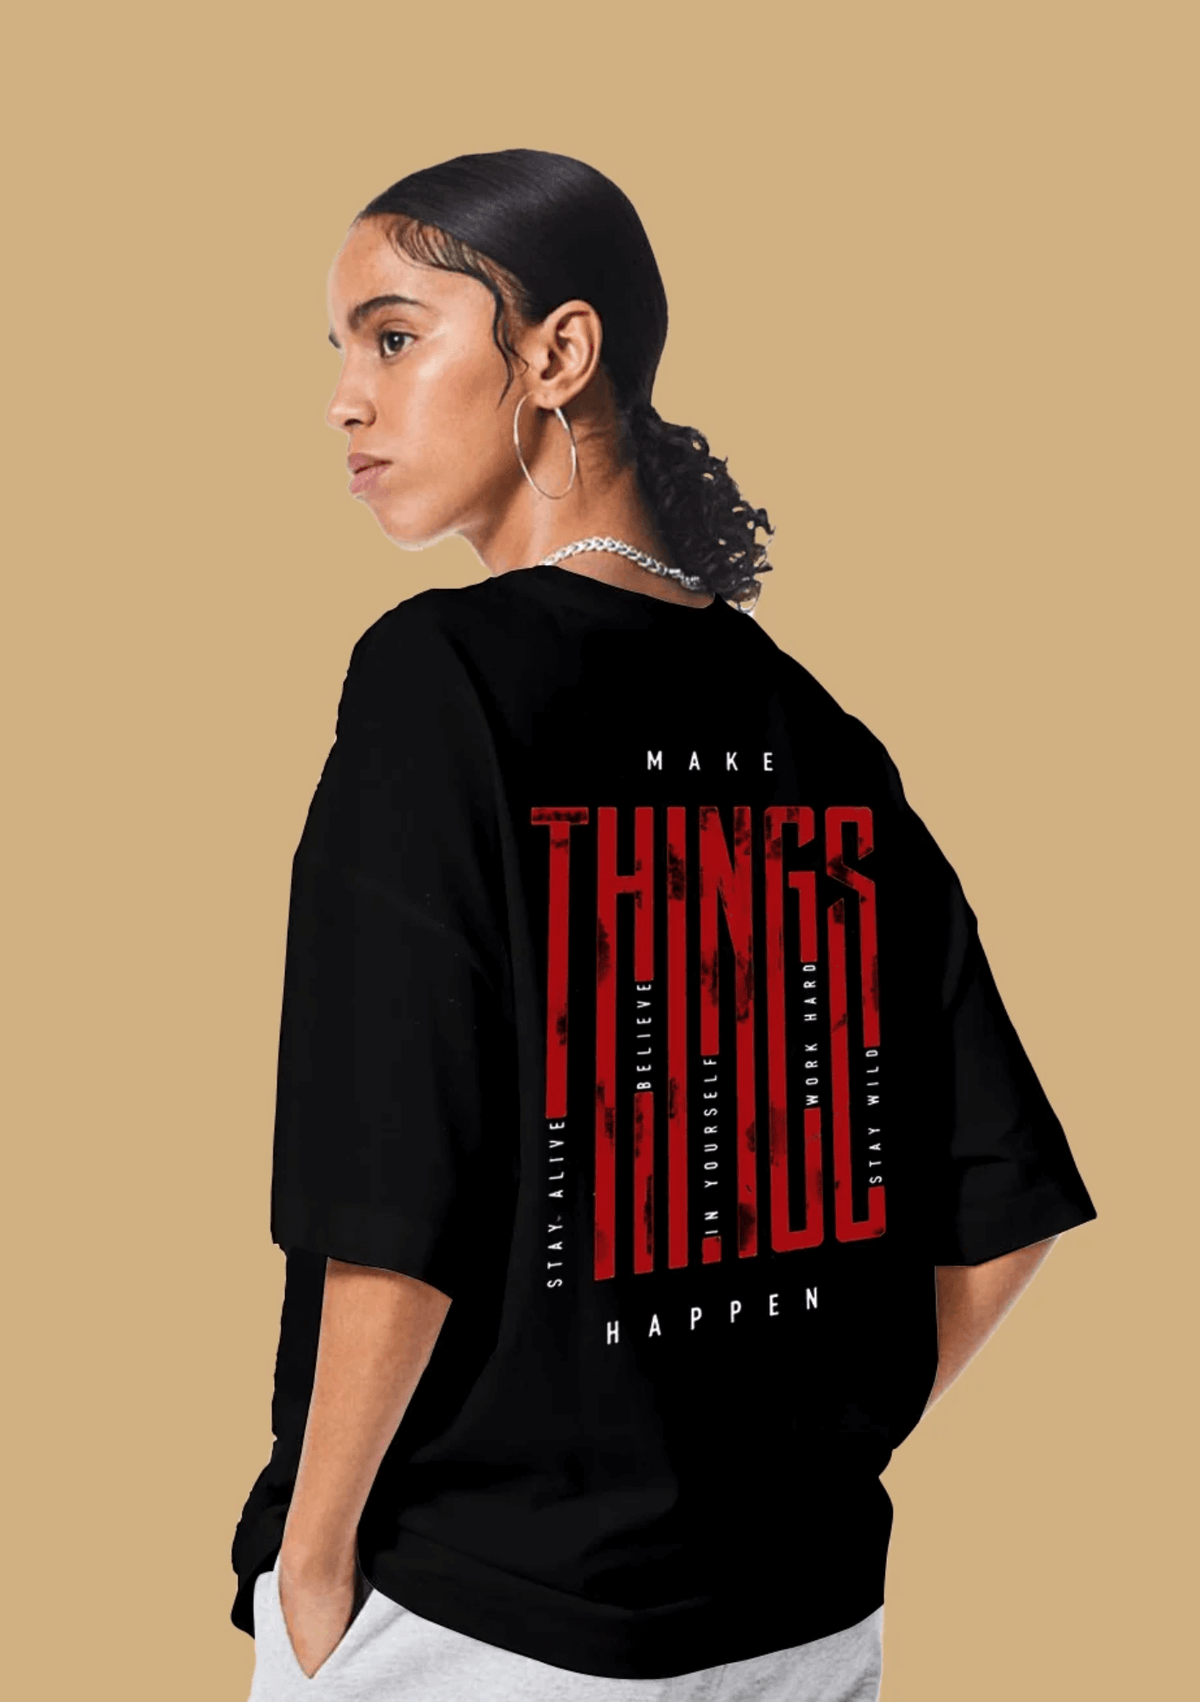 Make things happen printed black color women's oversized t-shirt by offmint